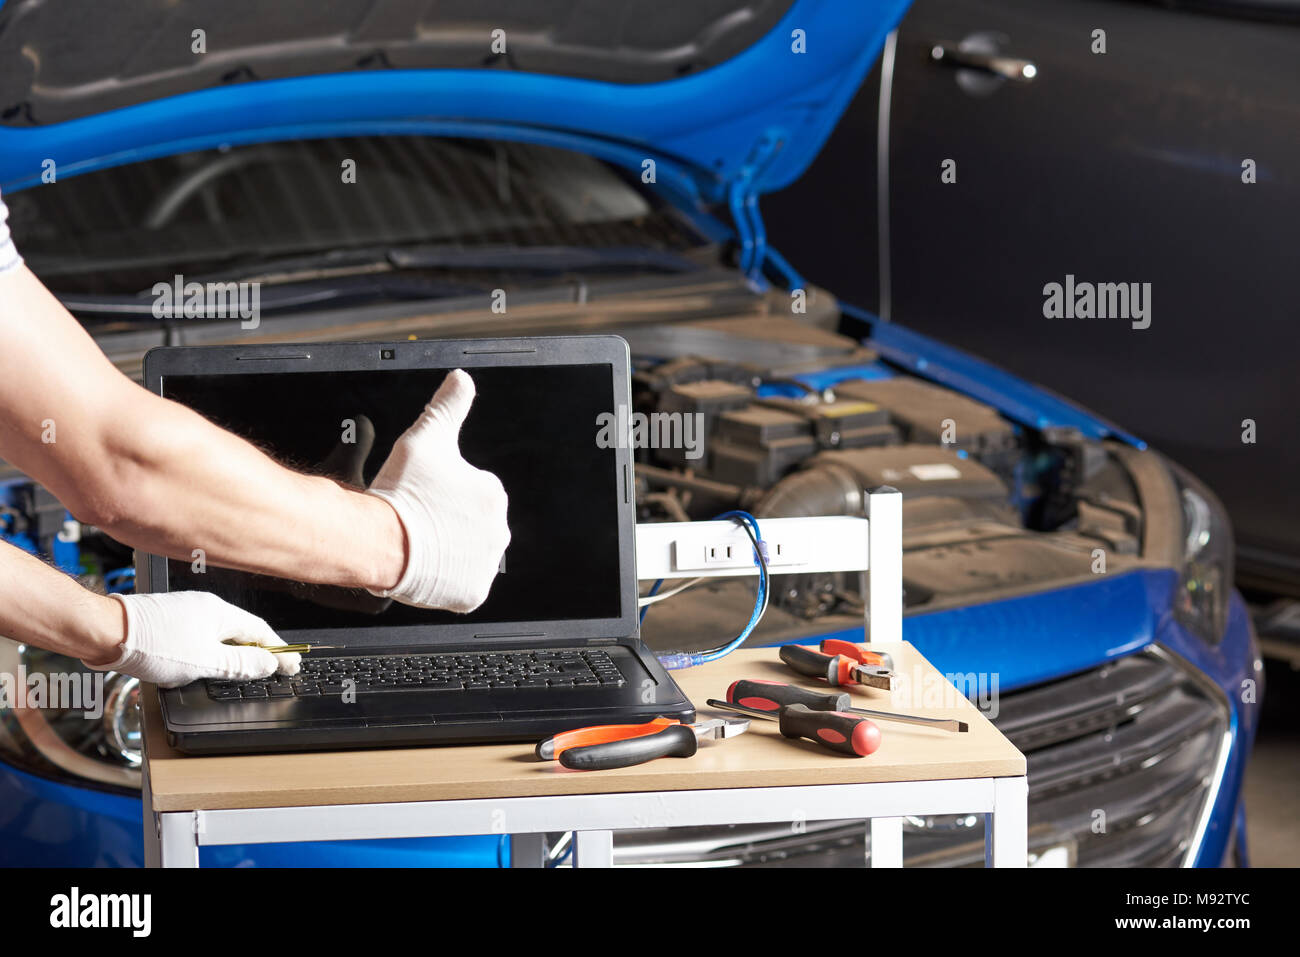 Car inspection garage mockup. Mechanic table with laptop and tools for maintenance service Stock Photo